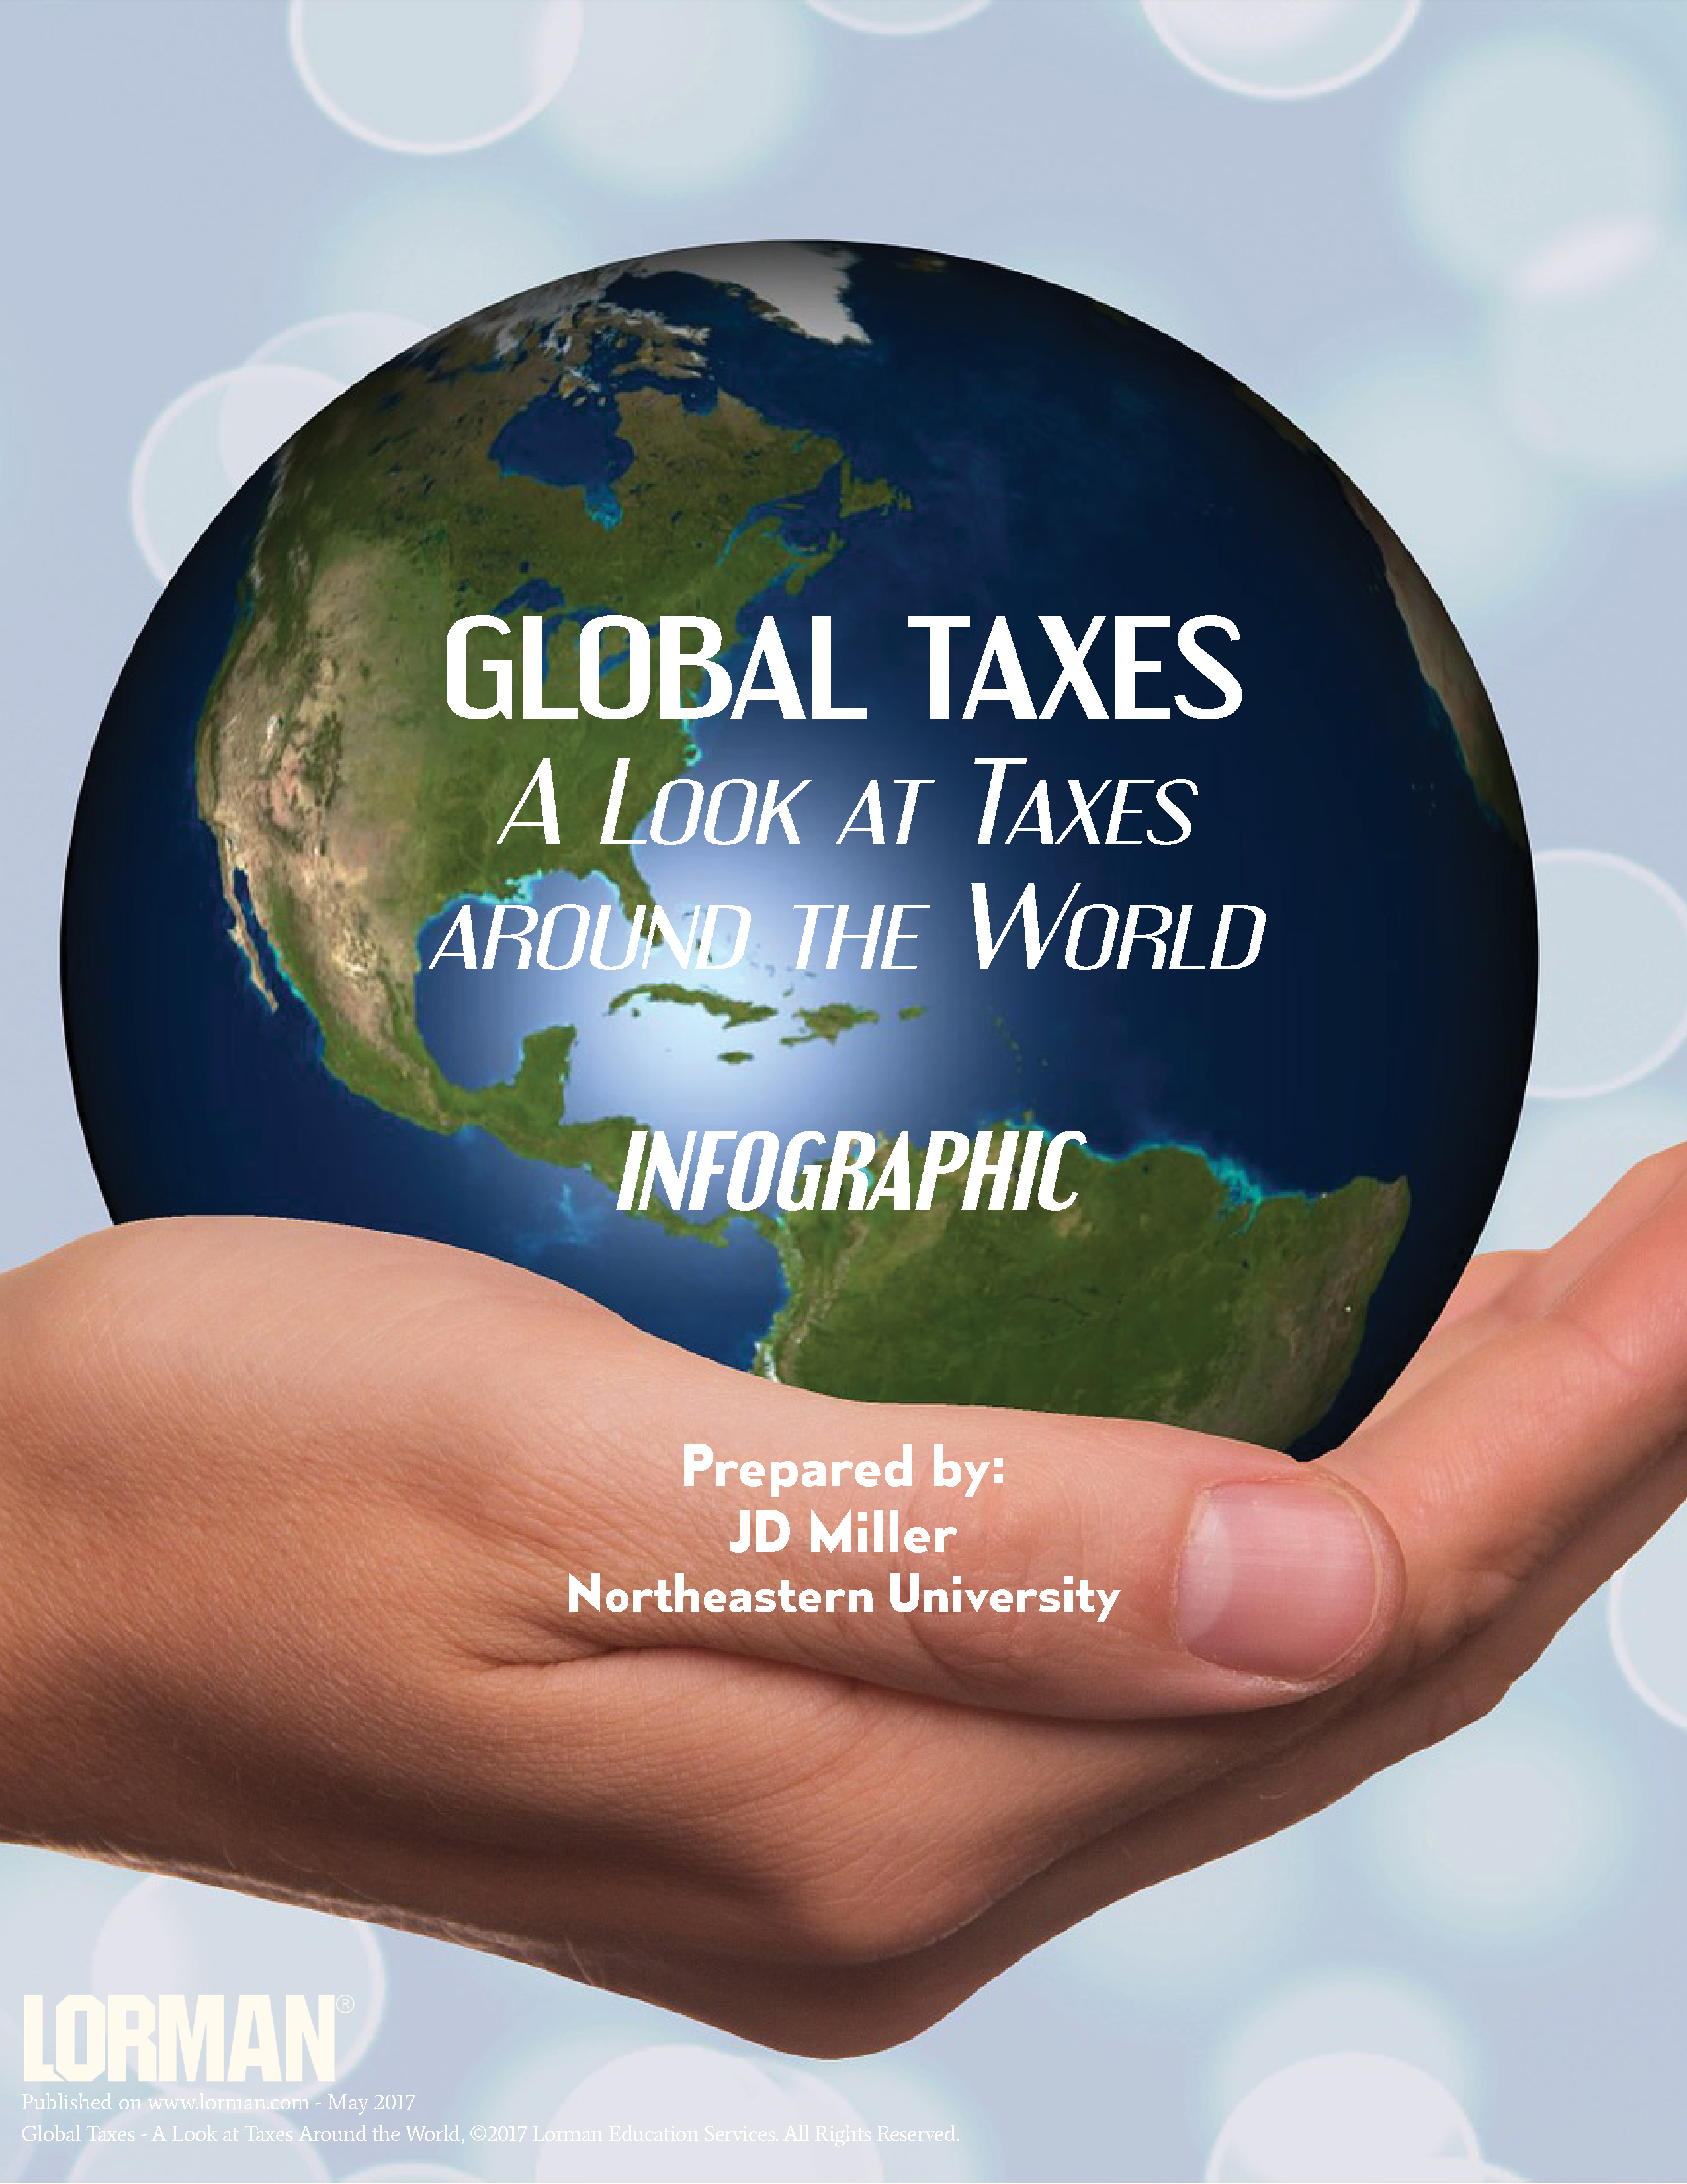 Global Taxes - A Look at Taxes Around the World